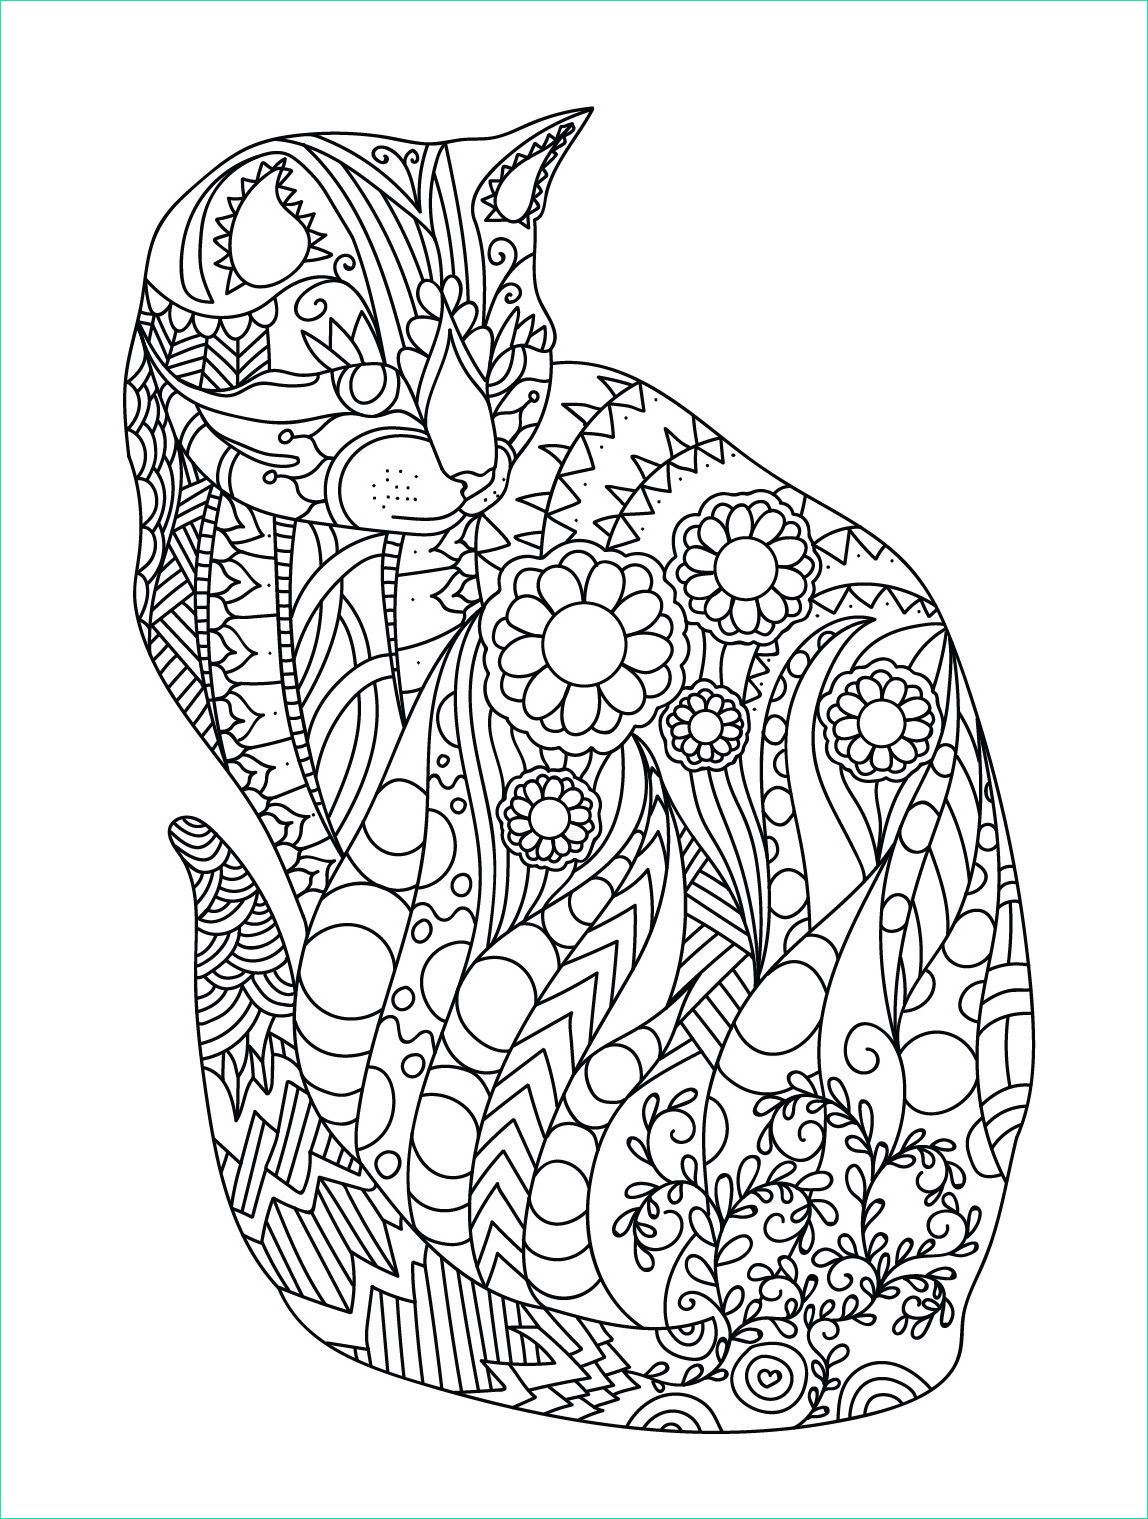 Mandala Animaux Chat Luxe Galerie 15 Luxe De Mandala Chat Image Coloriage Coloriage